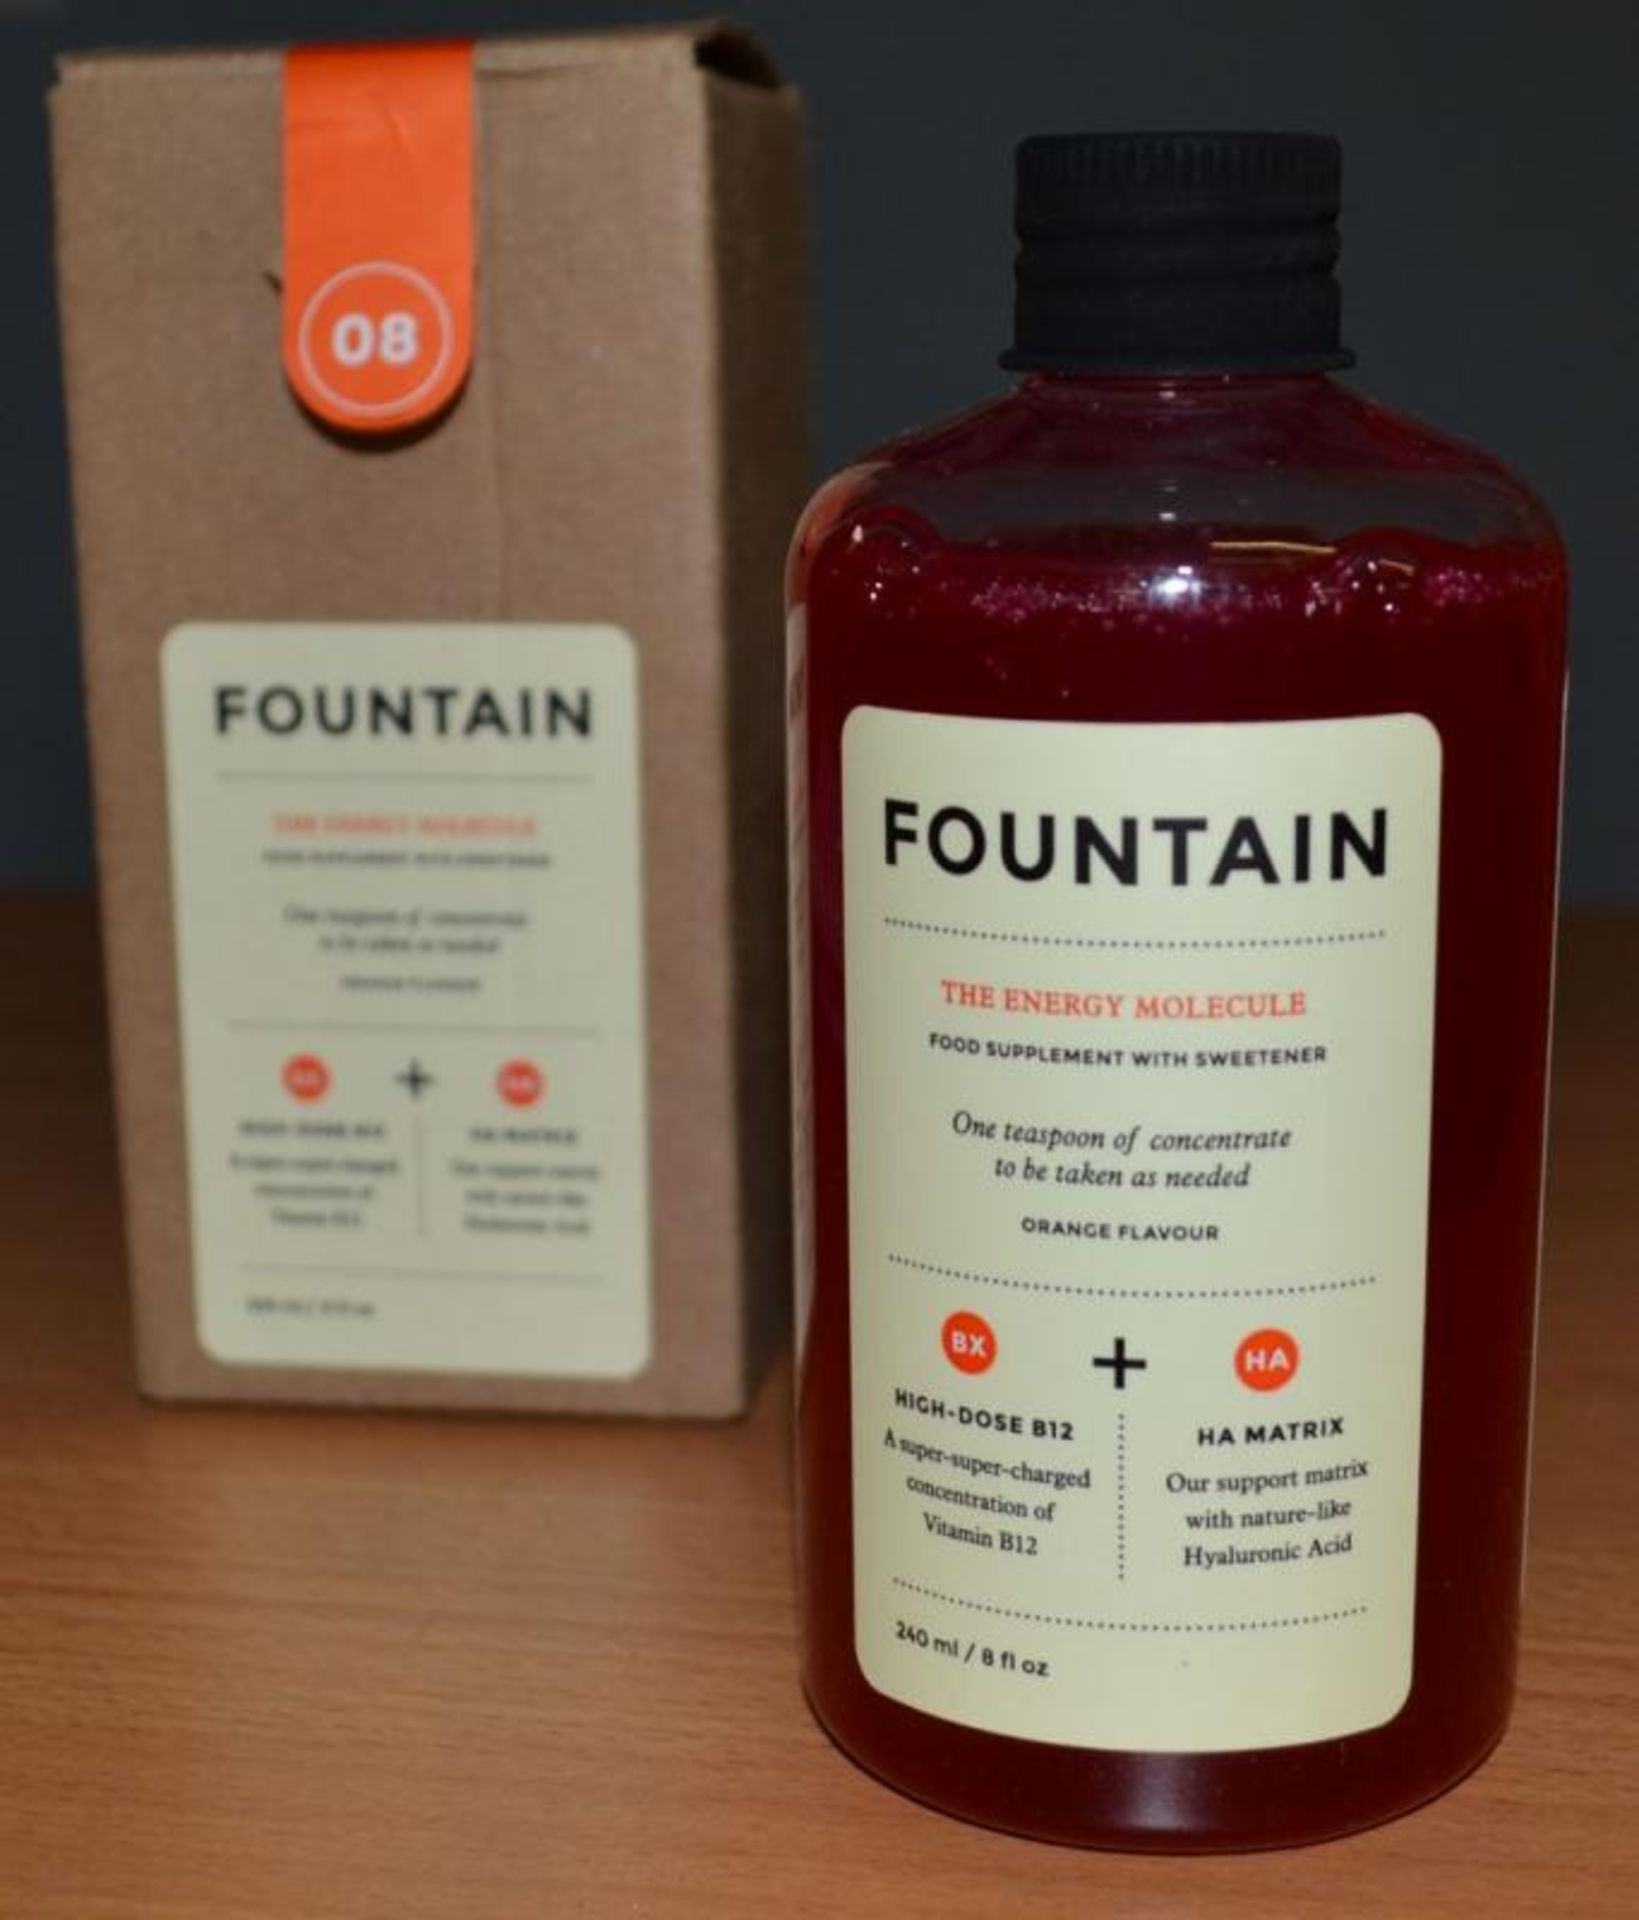 20 x 240ml Bottles of Fountain, The Energy Molecule Supplement - New & Boxed - CL185 - Ref: - Image 3 of 6